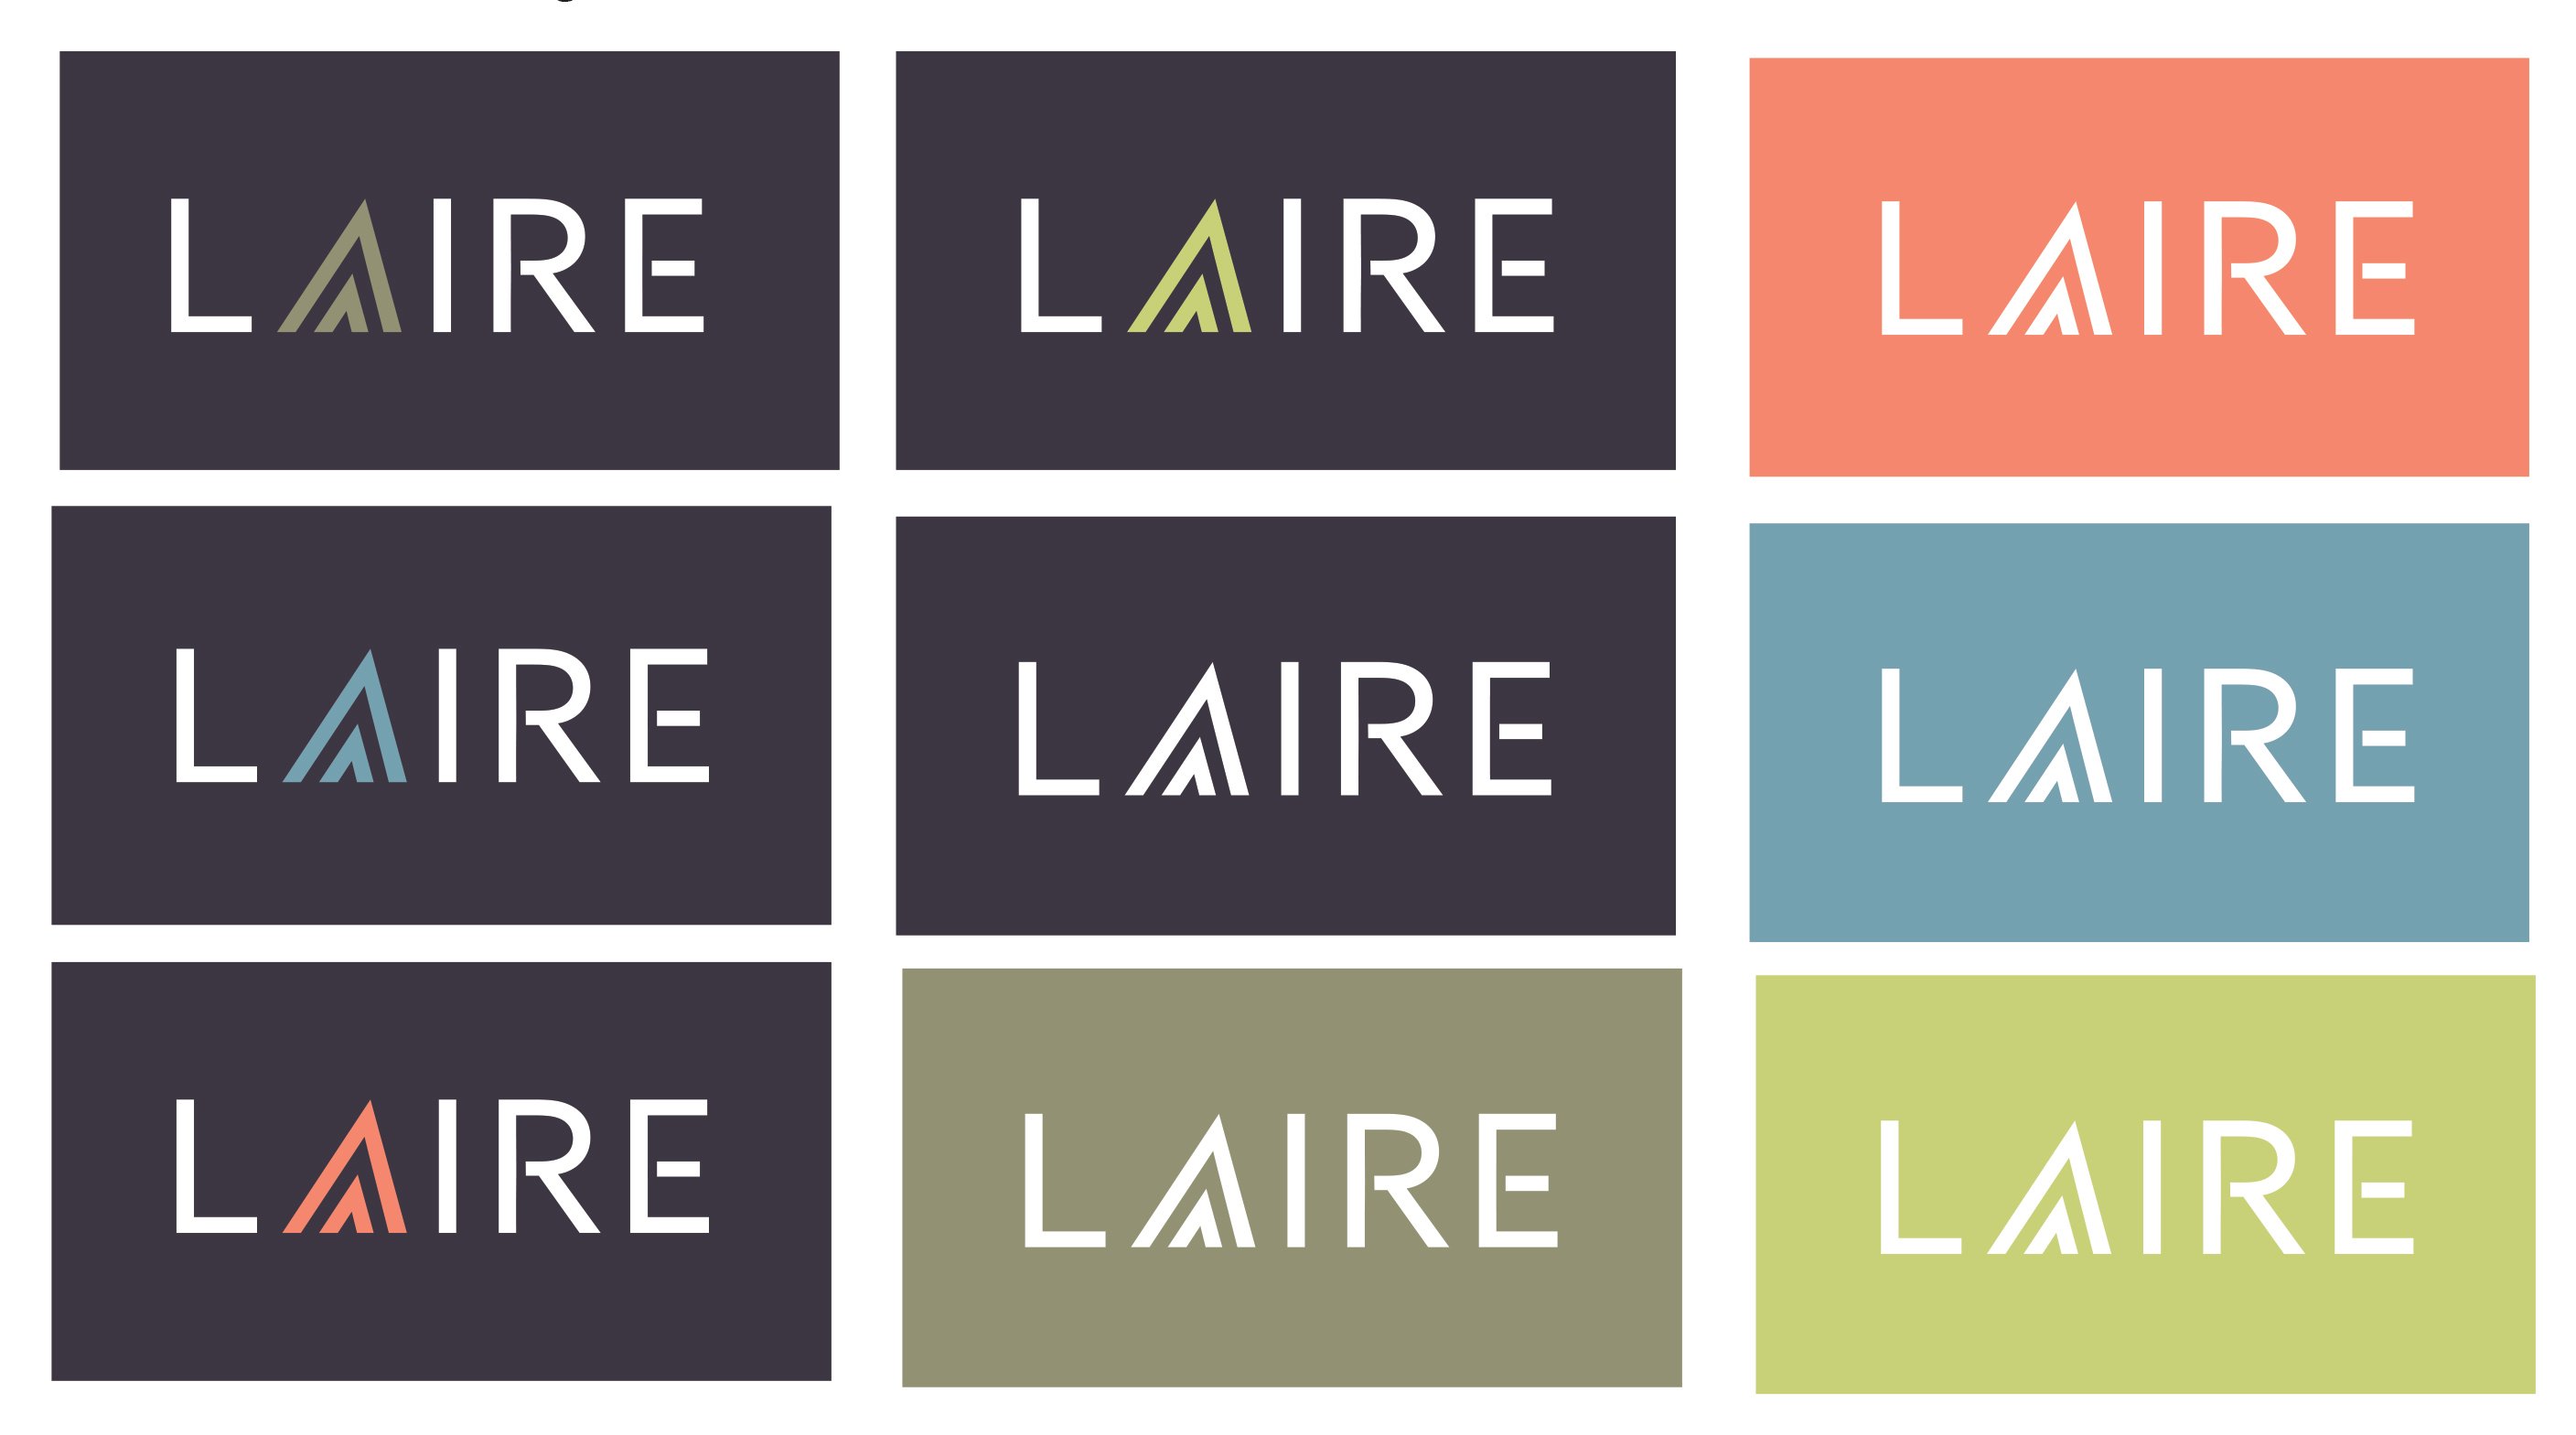 LAIRE logo variations